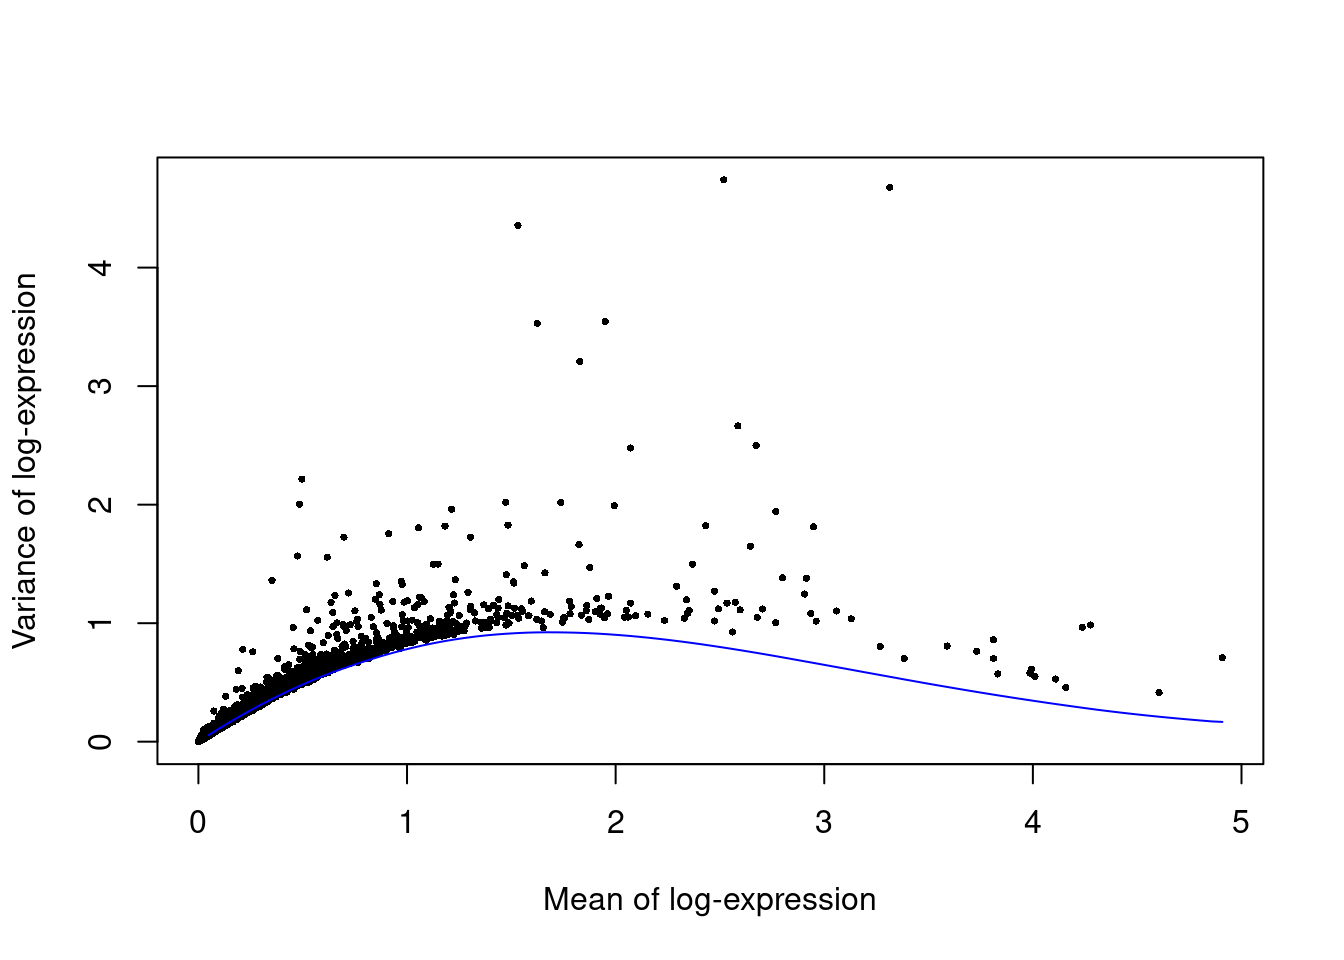 Per-gene variance as a function of the mean for the log-expression values in the Paul HSC dataset. Each point represents a gene (black) with the mean-variance trend (blue) fitted to simulated Poisson noise.